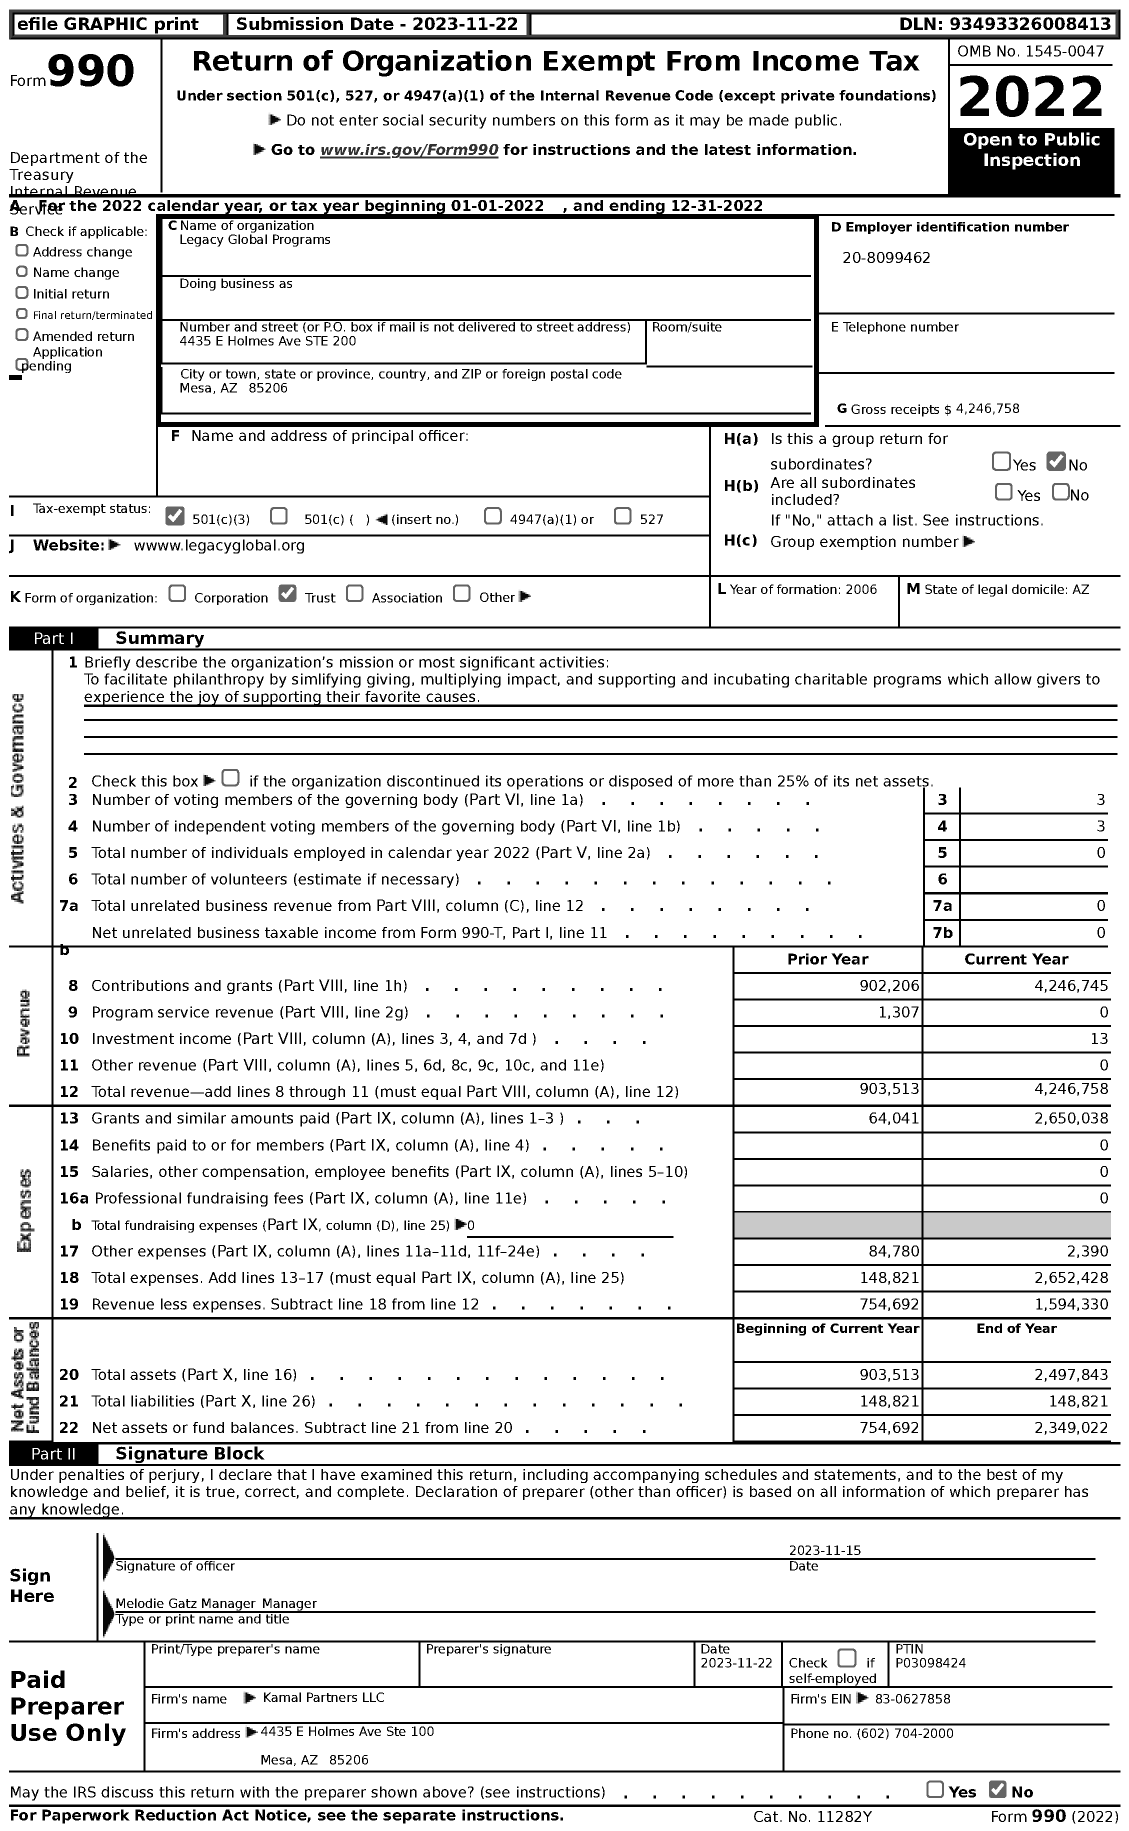 Image of first page of 2022 Form 990 for Legacy Global Programs